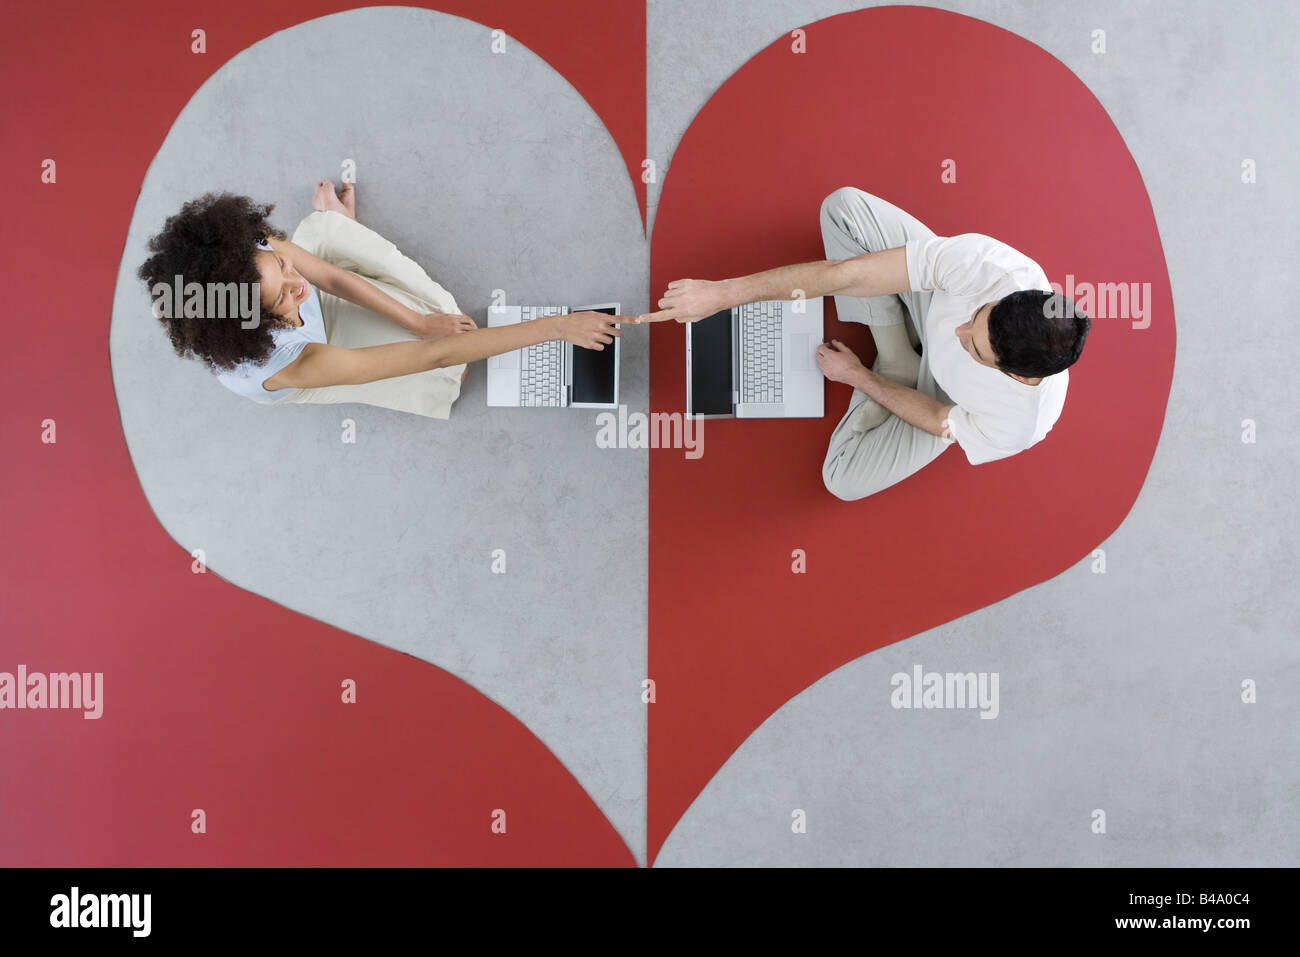 Couple sitting face to face with laptop computers on heart shape, touching fingers, overhead view Stock Photo